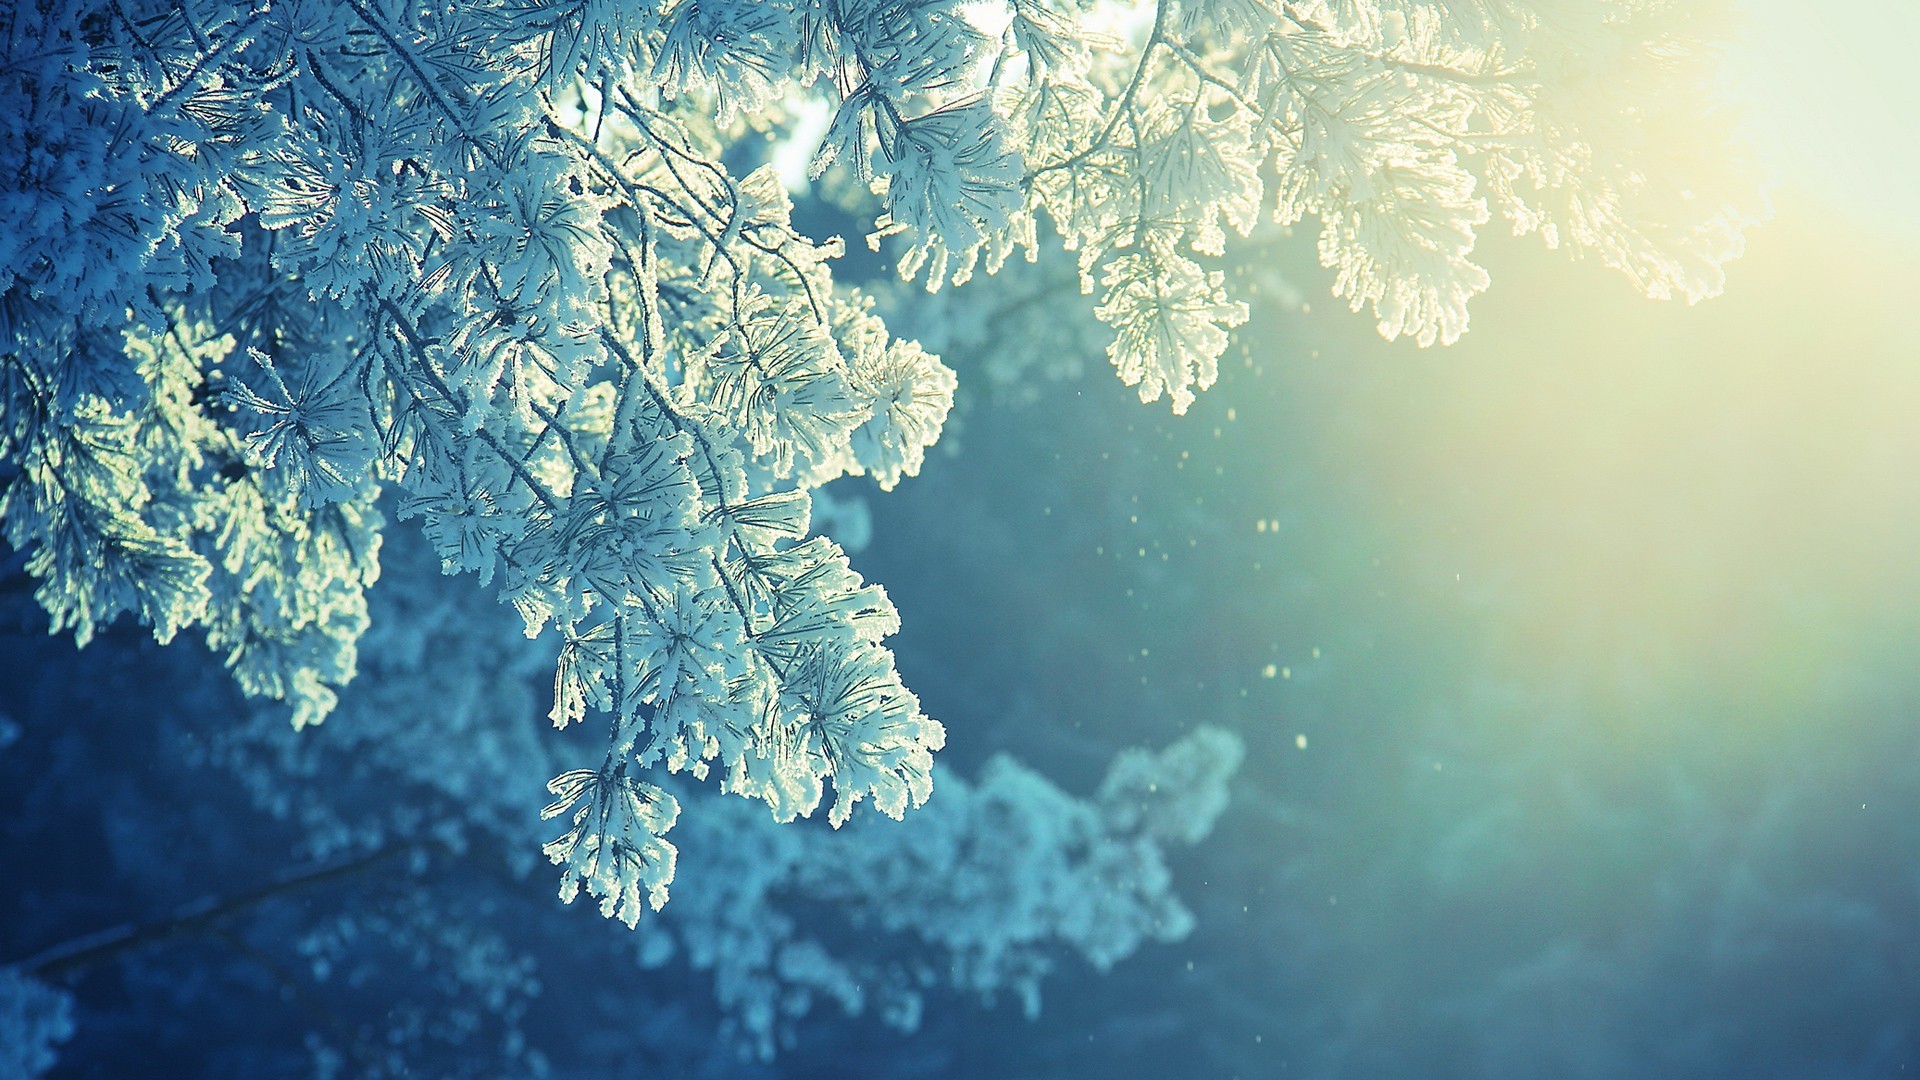 Nature Anime Snow Winter Cold Sunlight Peaceful Frost Trees Plants Ice Cyan Blue 1920x1080